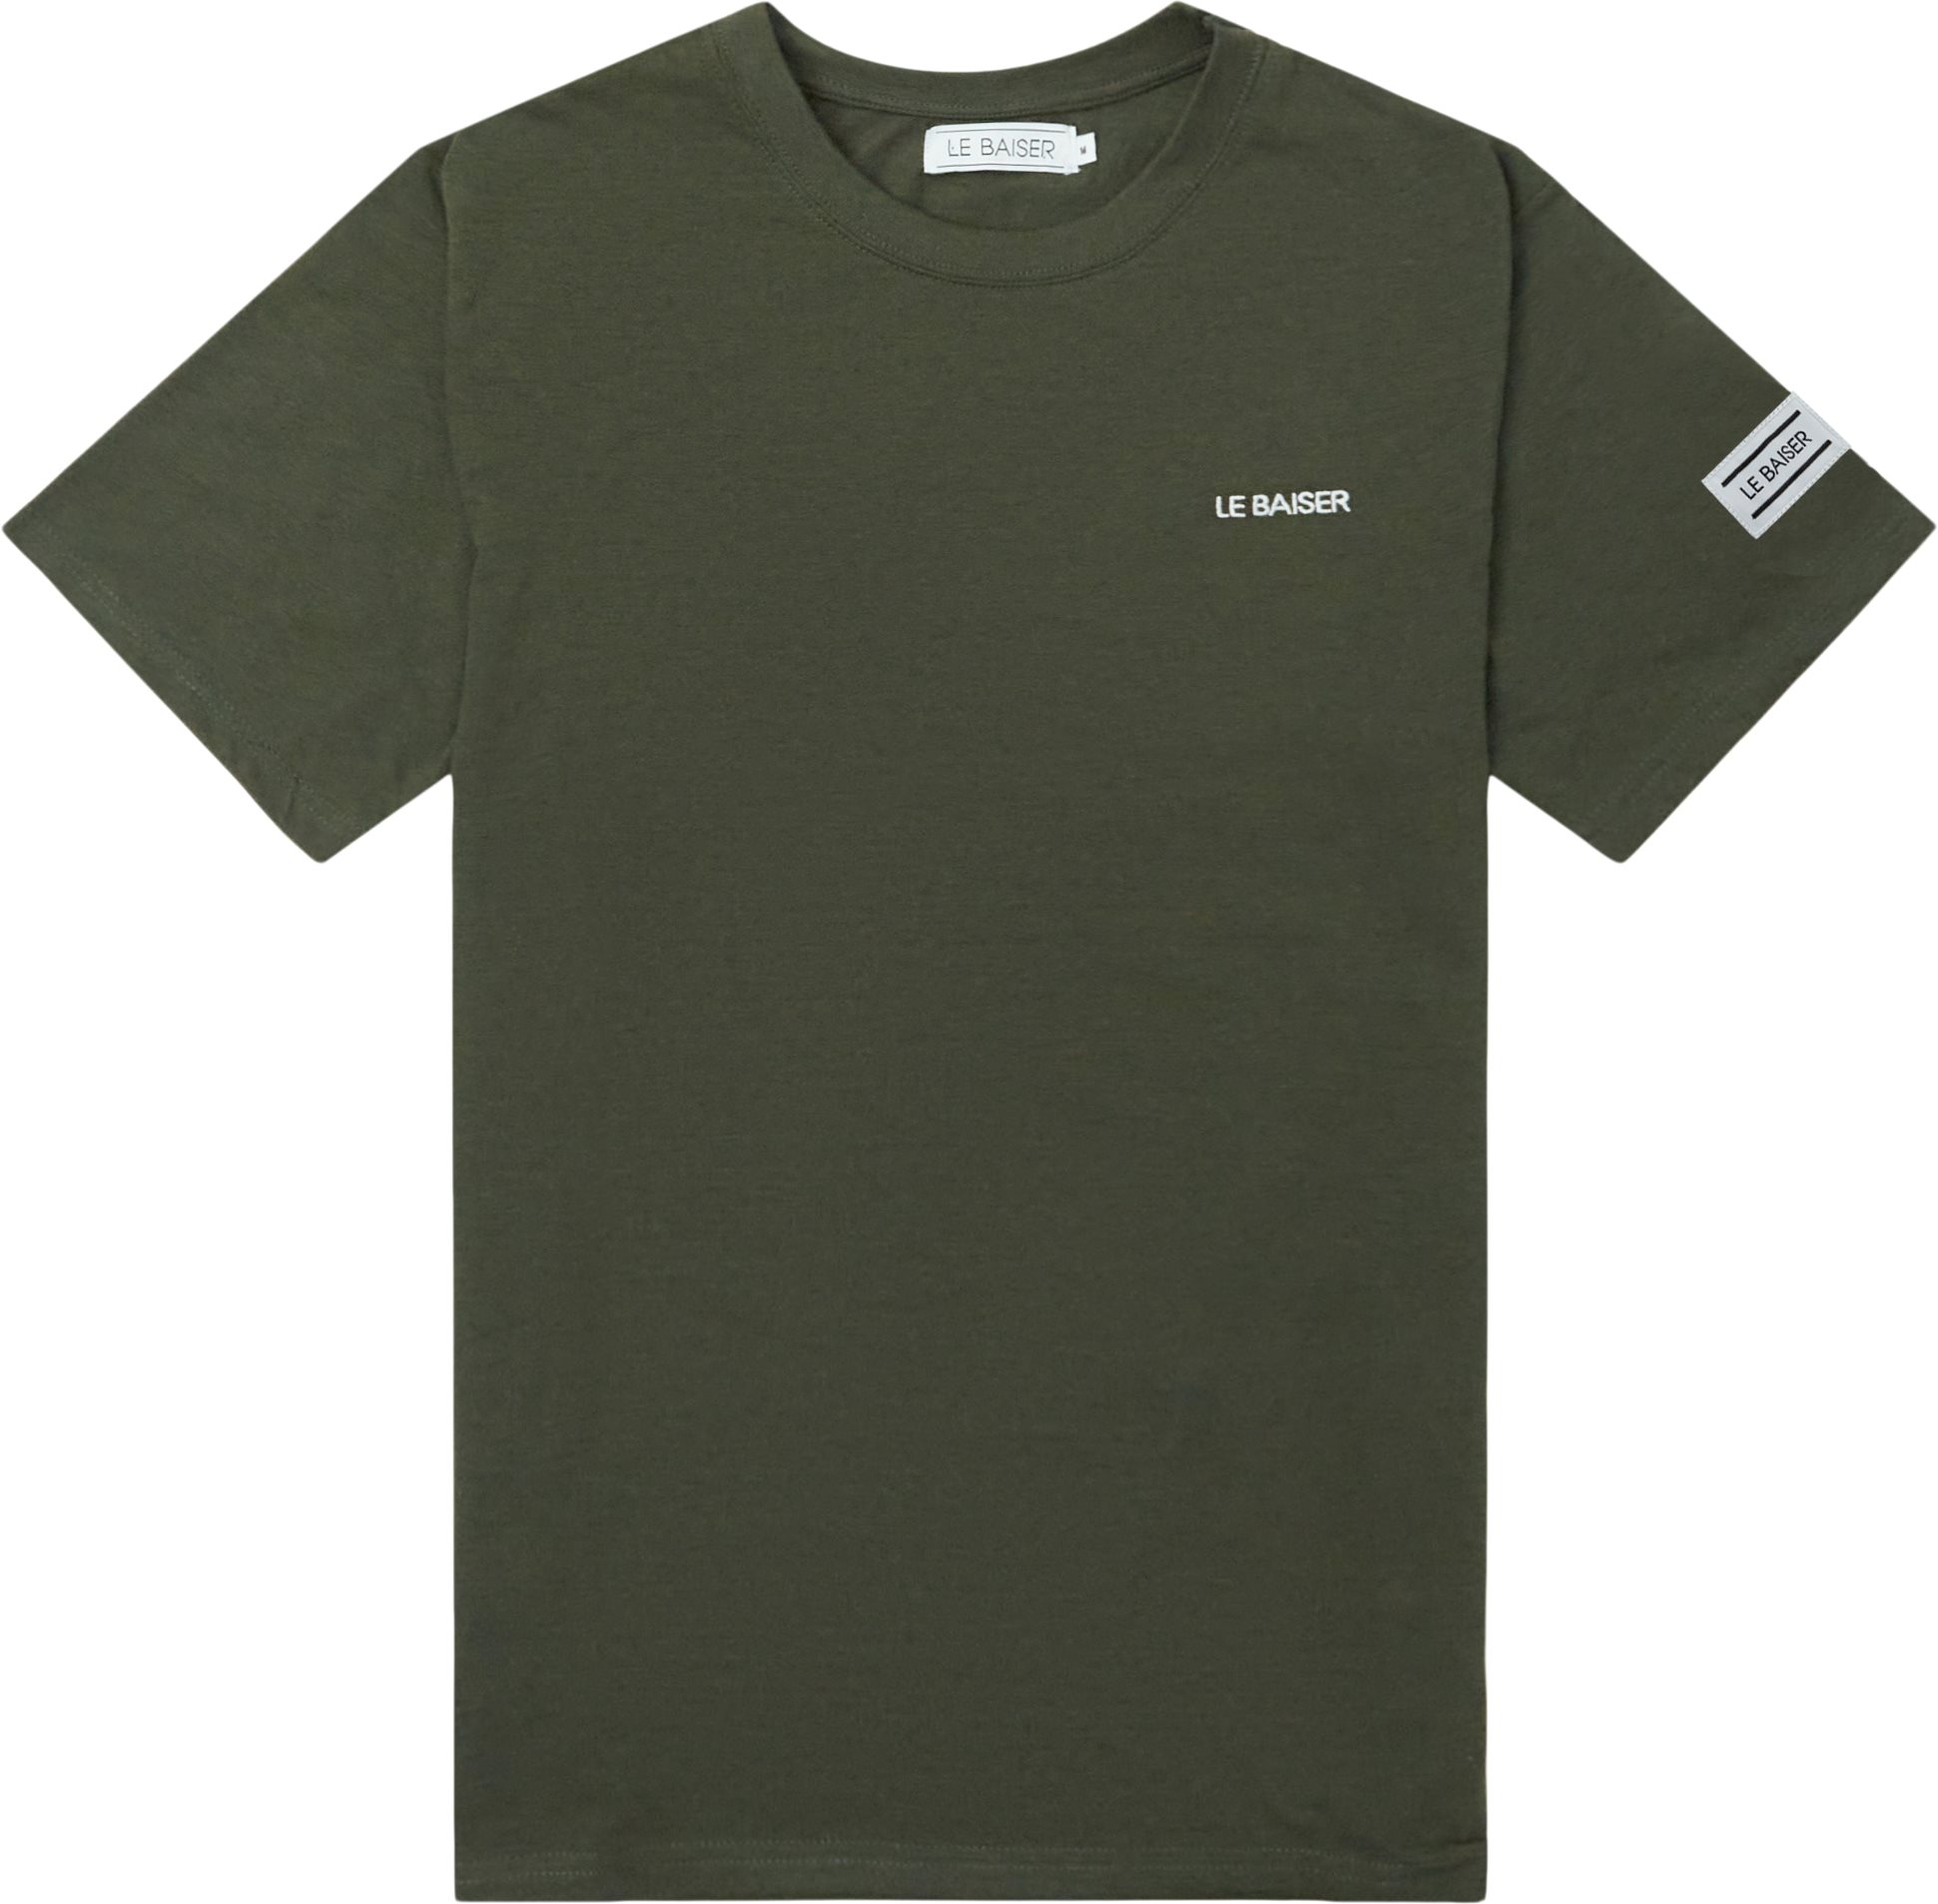 Bourg Tee - T-shirts - Regular fit - Army